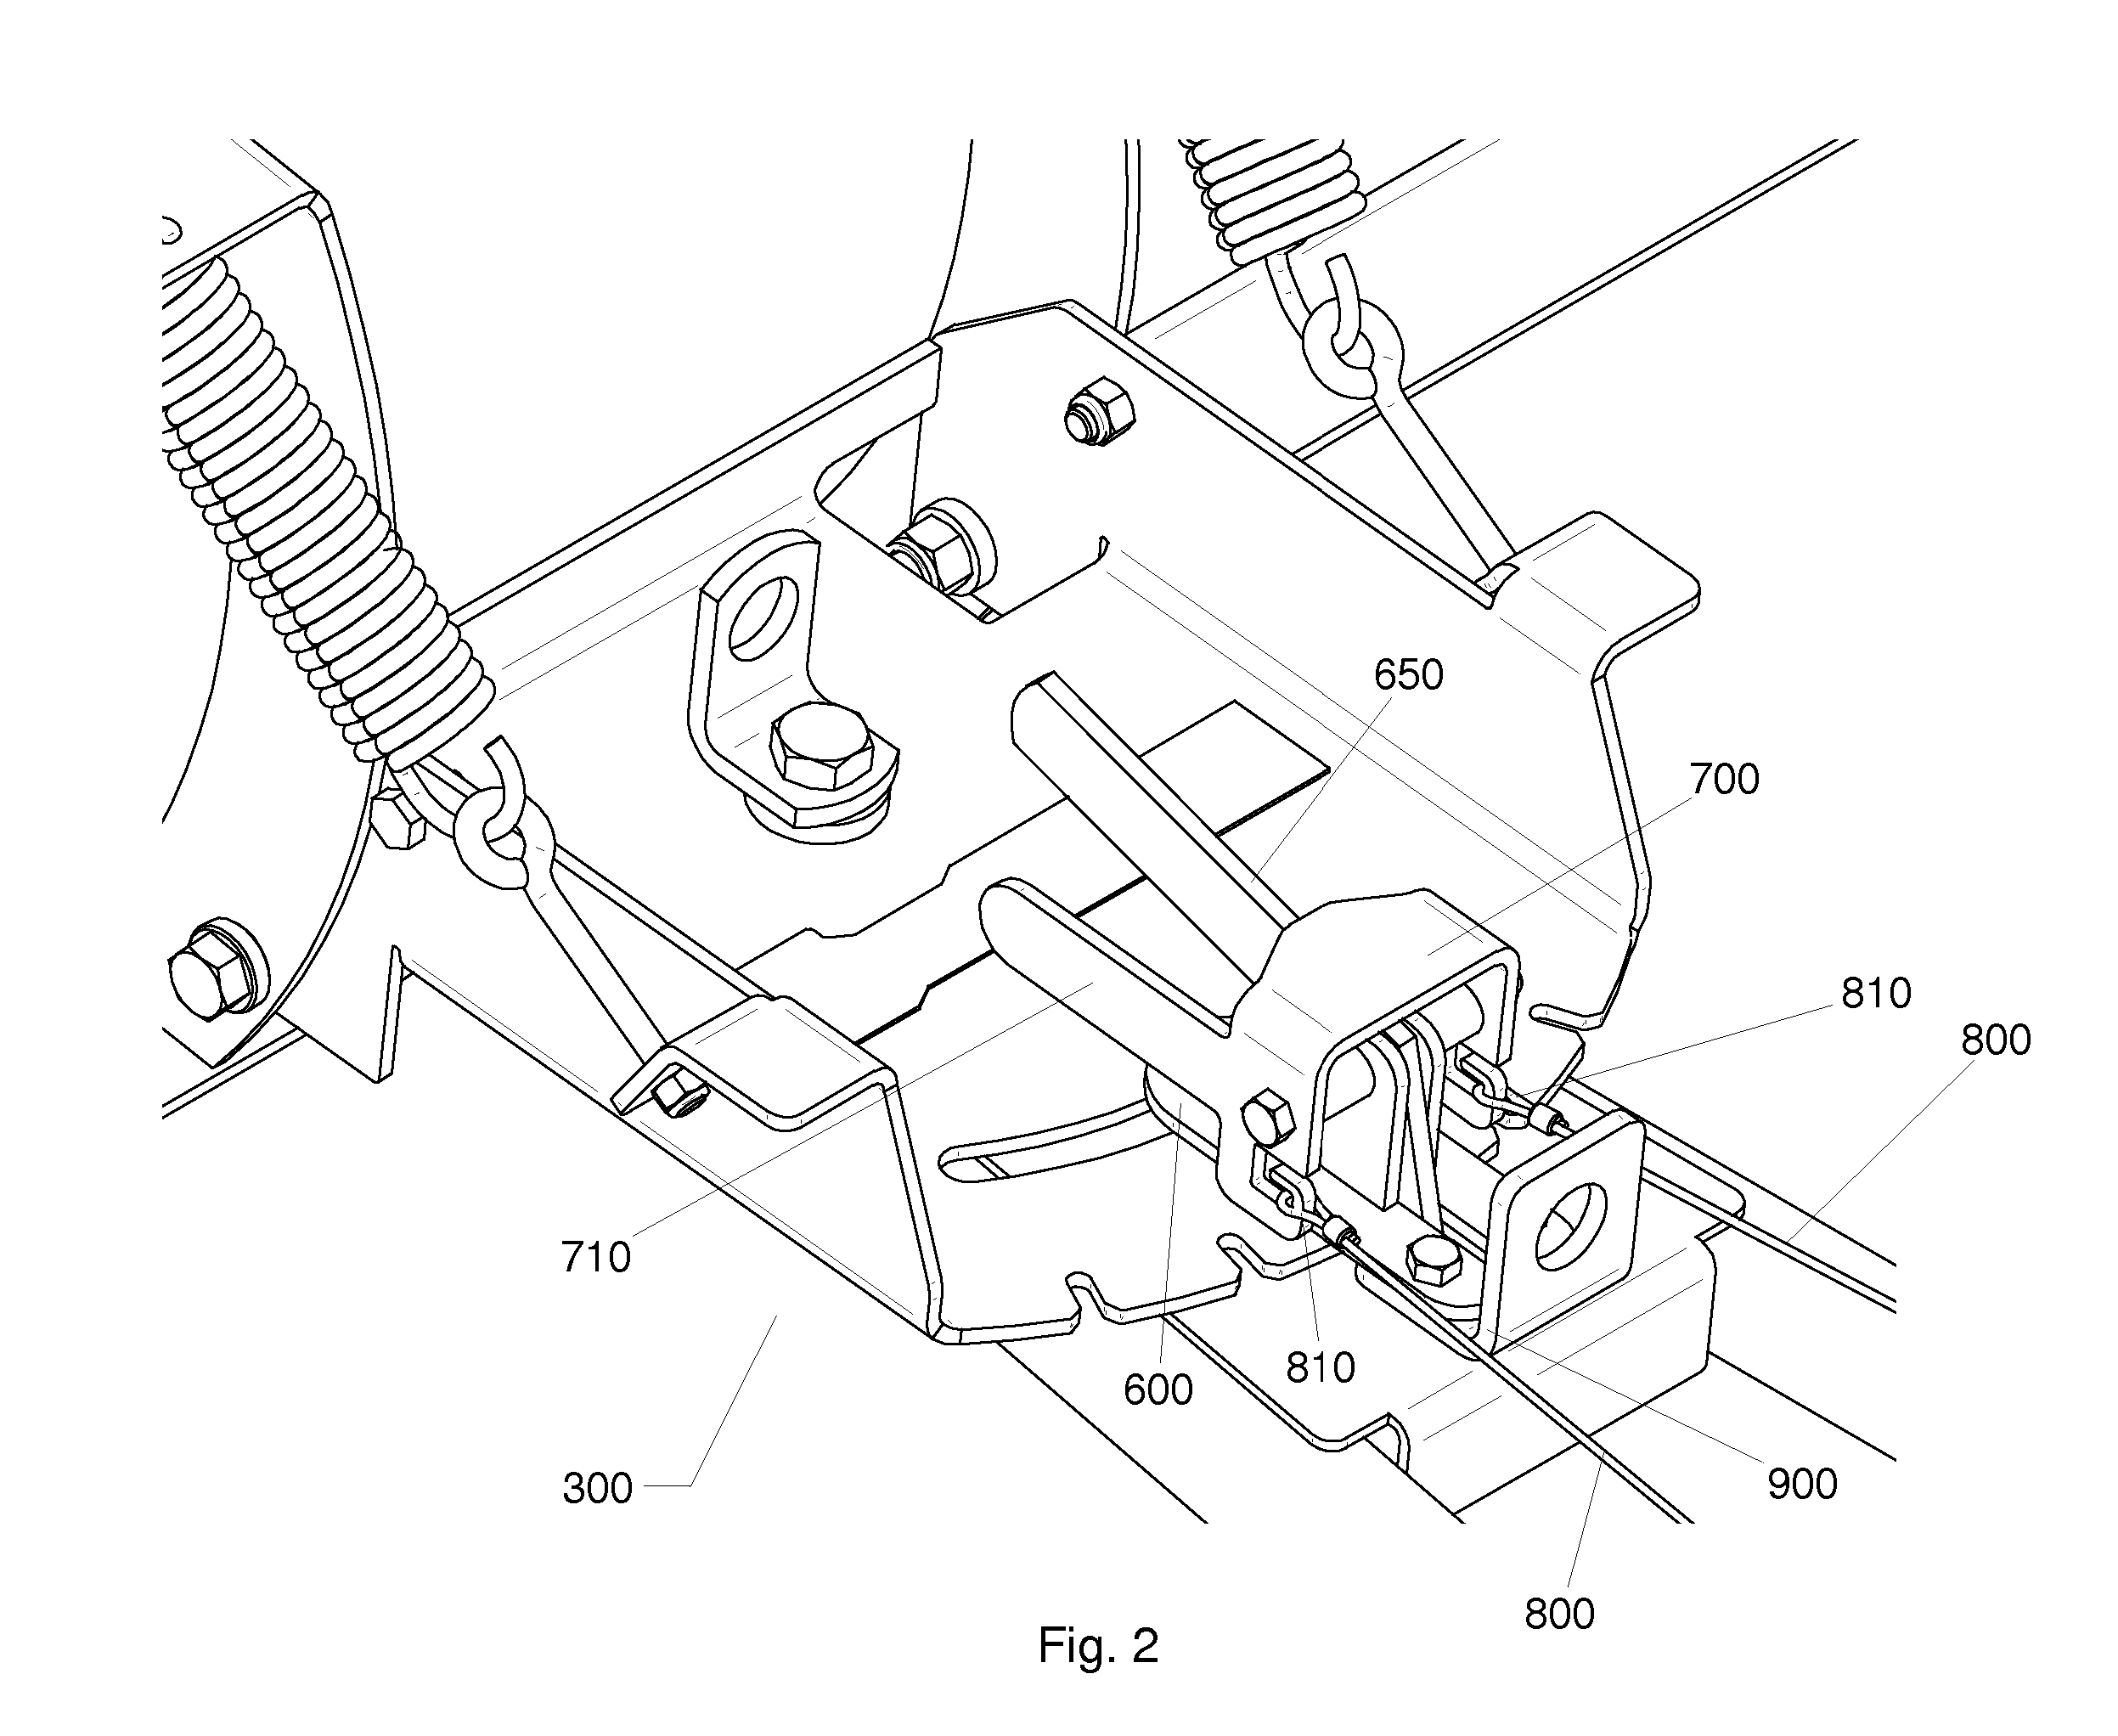 ATV plow support frame assembly with quick locking system and method for installing same